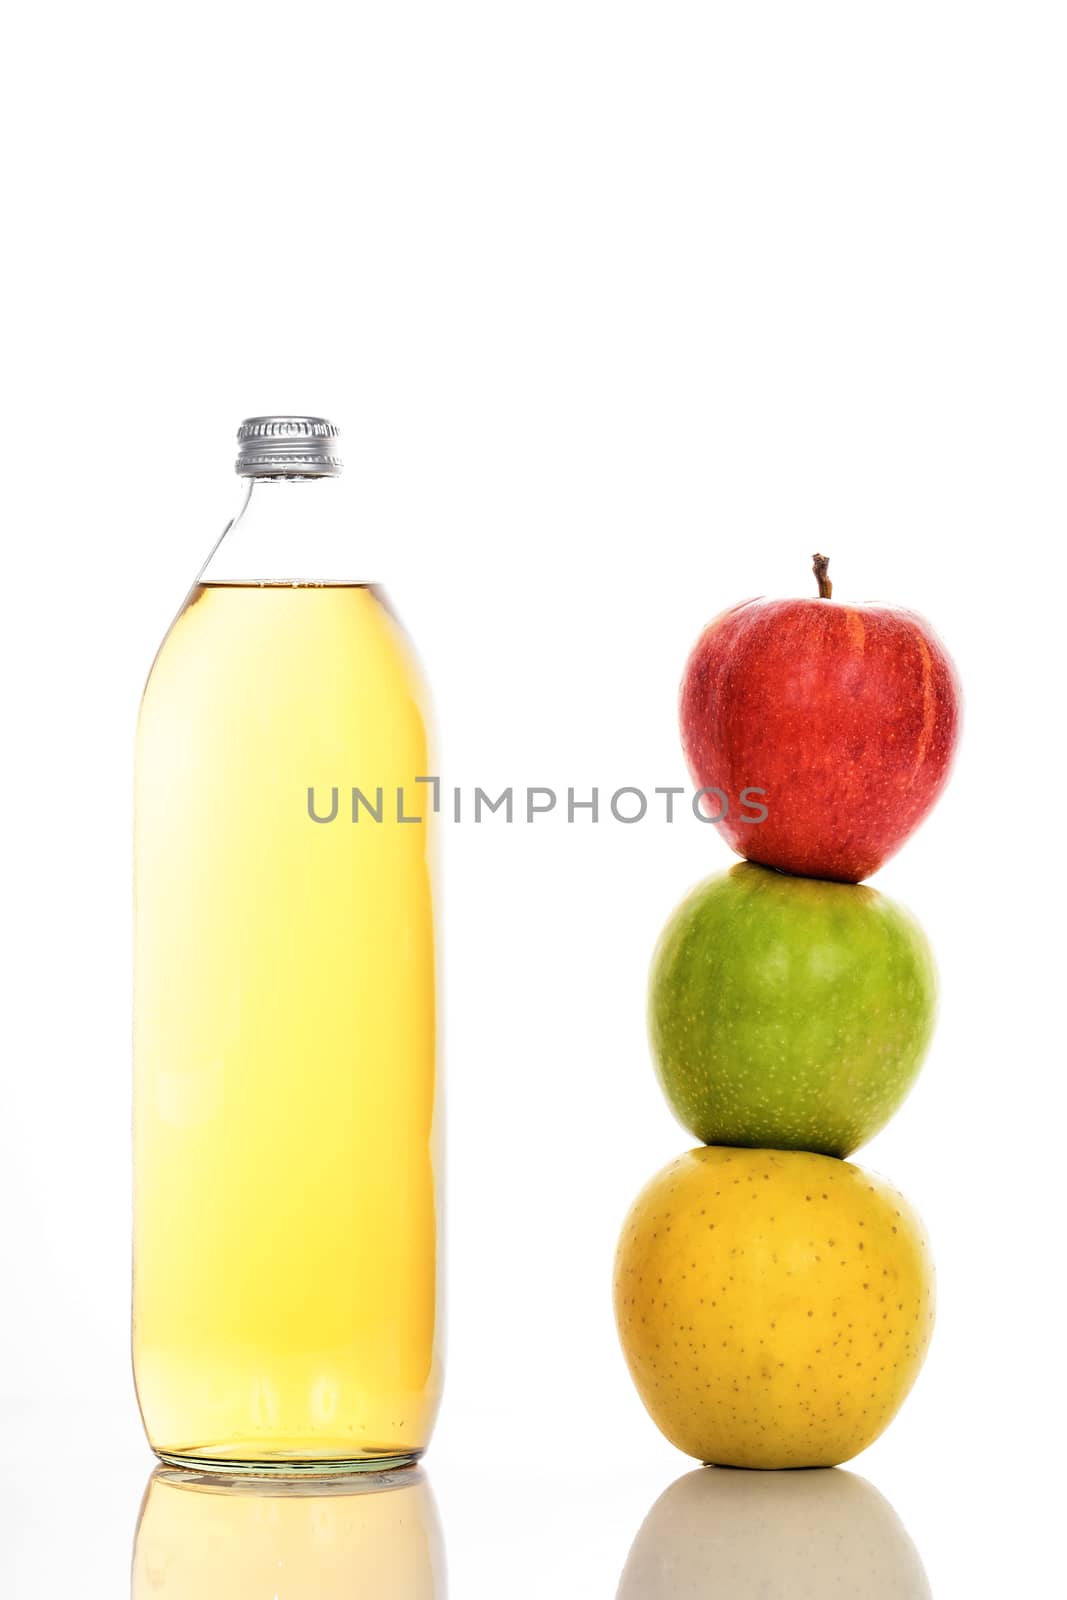 Apple juice in glass bottle and three ripe apples